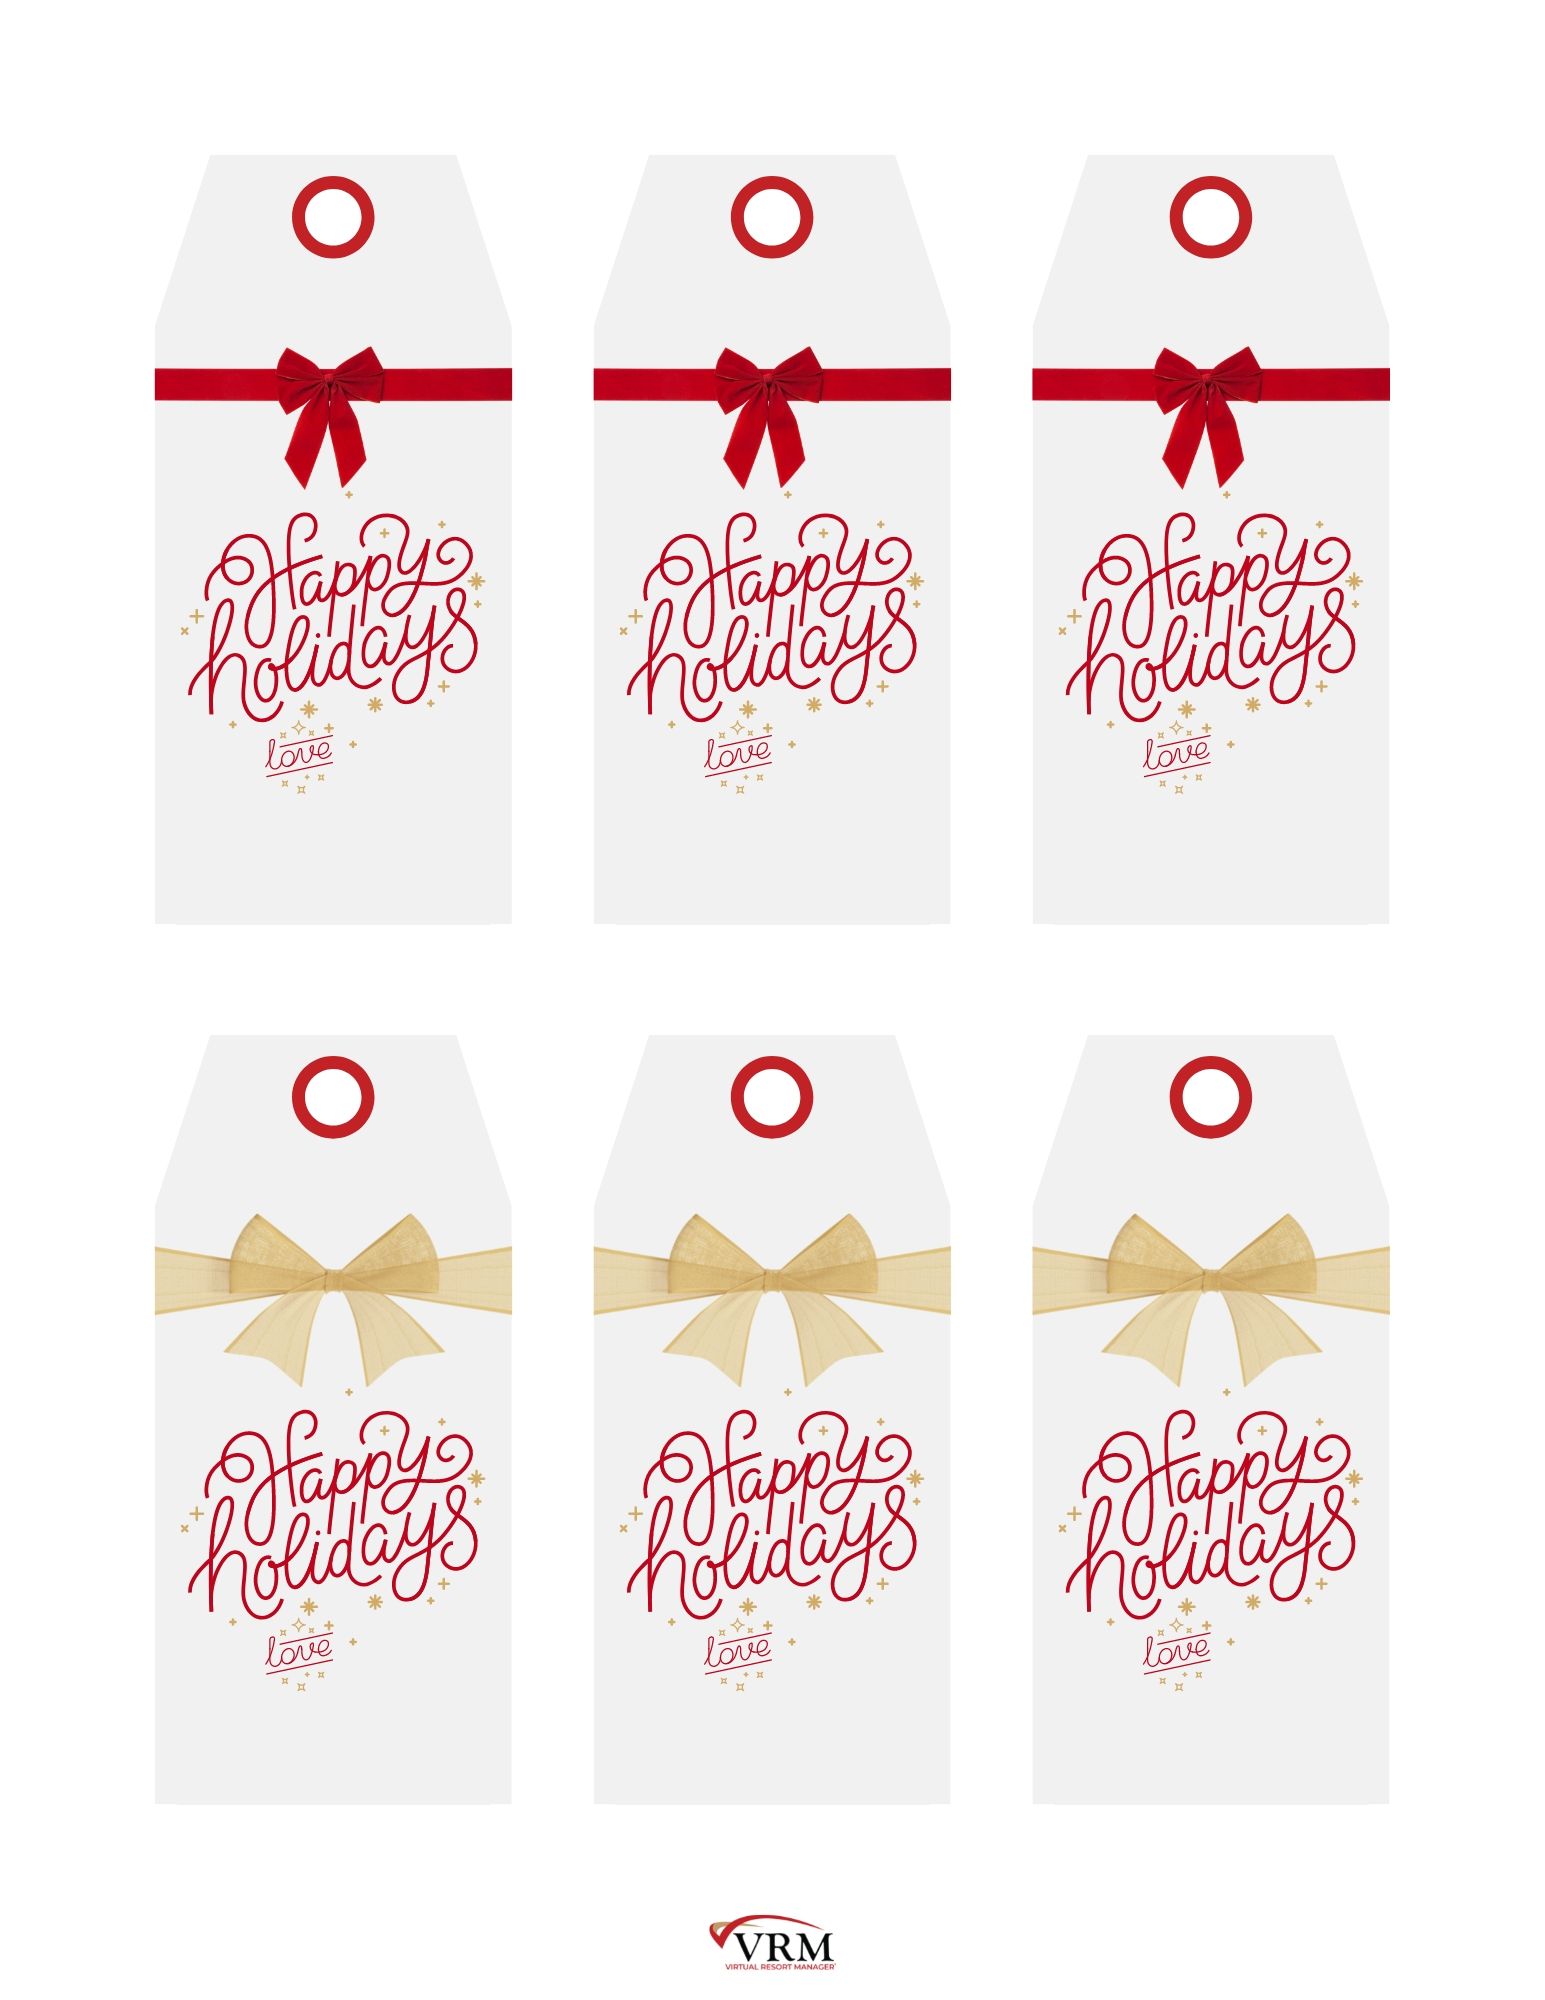 Easy DIY Holiday Gift, Free Wine & Gift Tag Printables